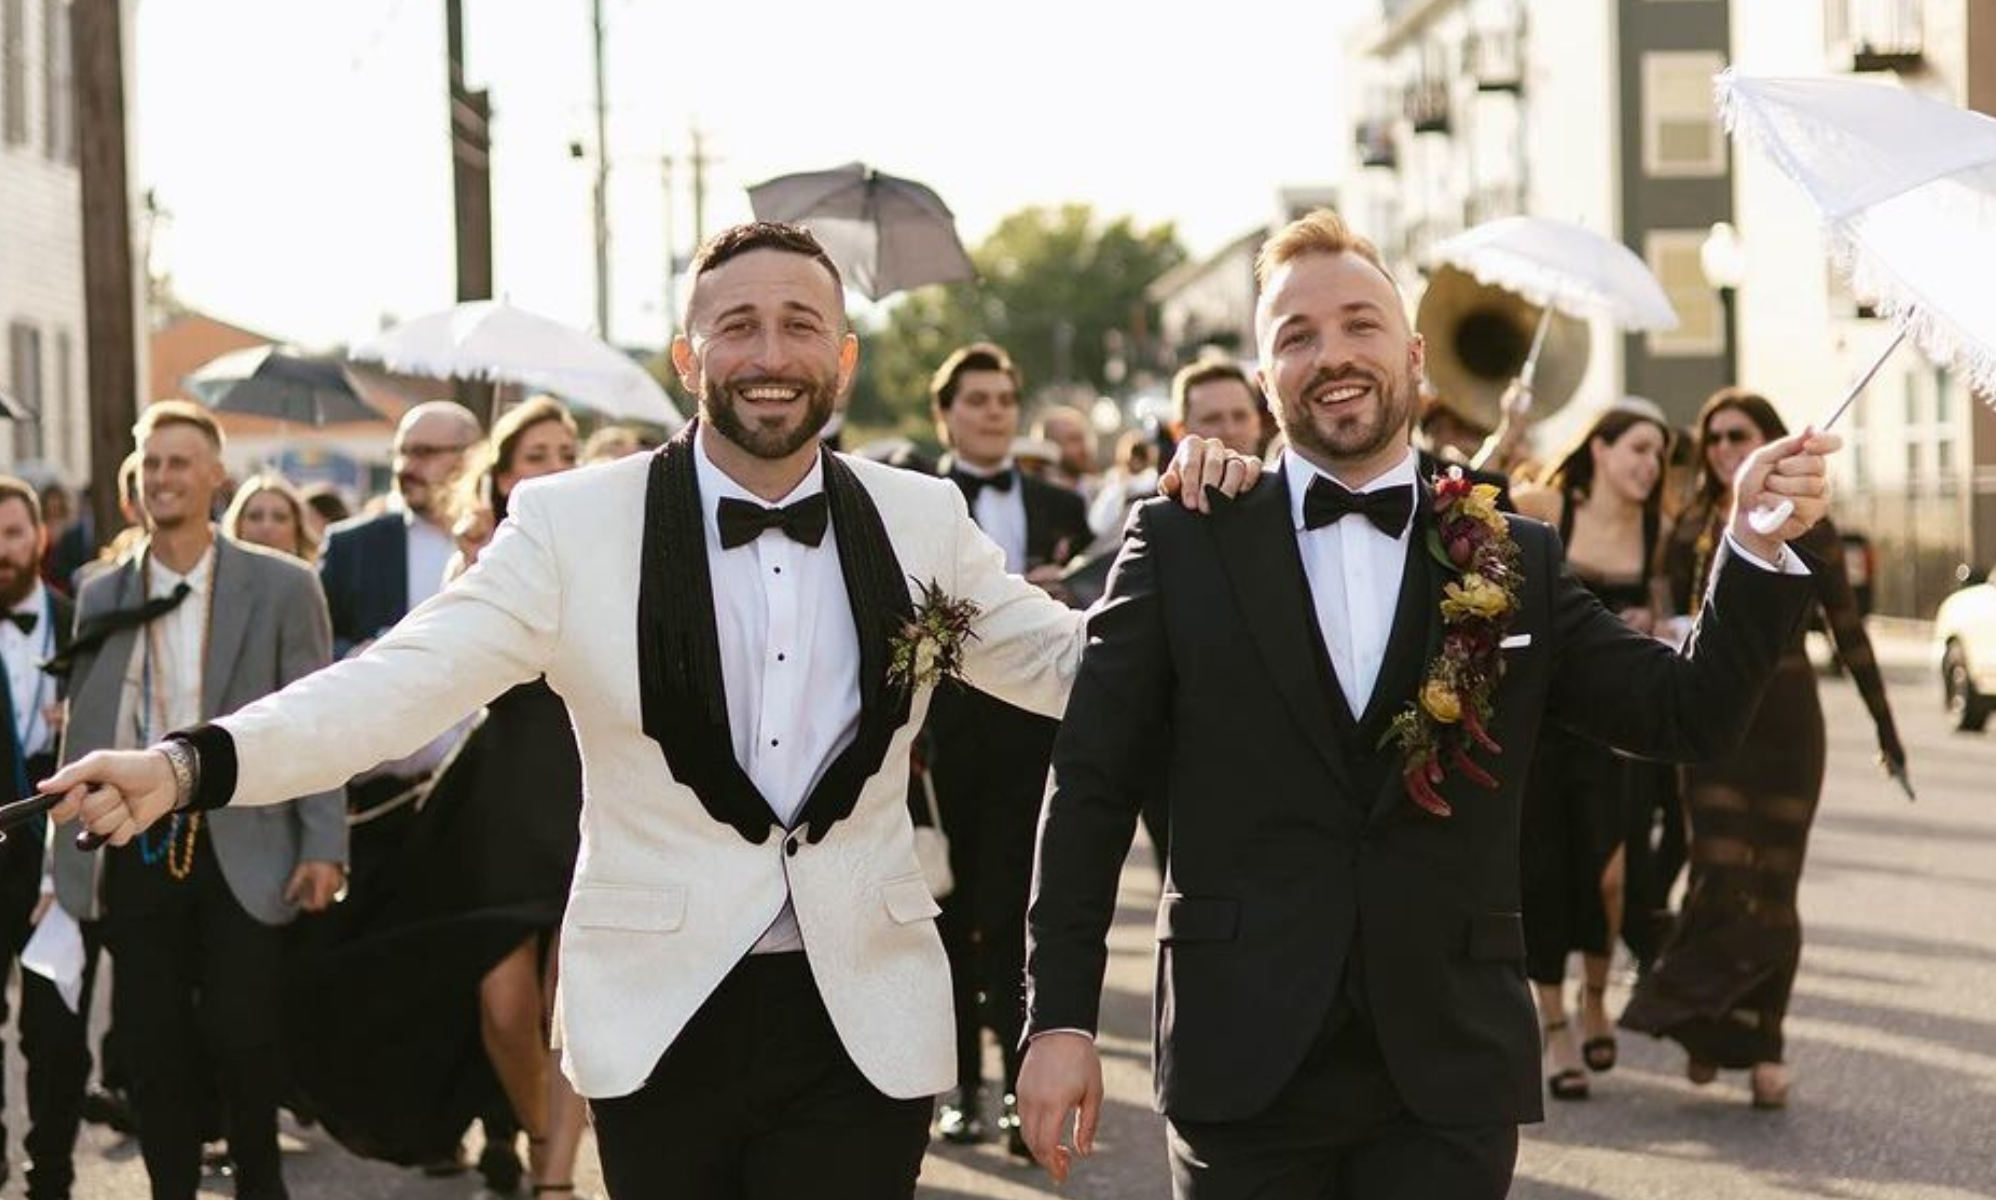 Gay ex-baseball star marries his partner in a lavish New Orleans wedding – complete with jazz band